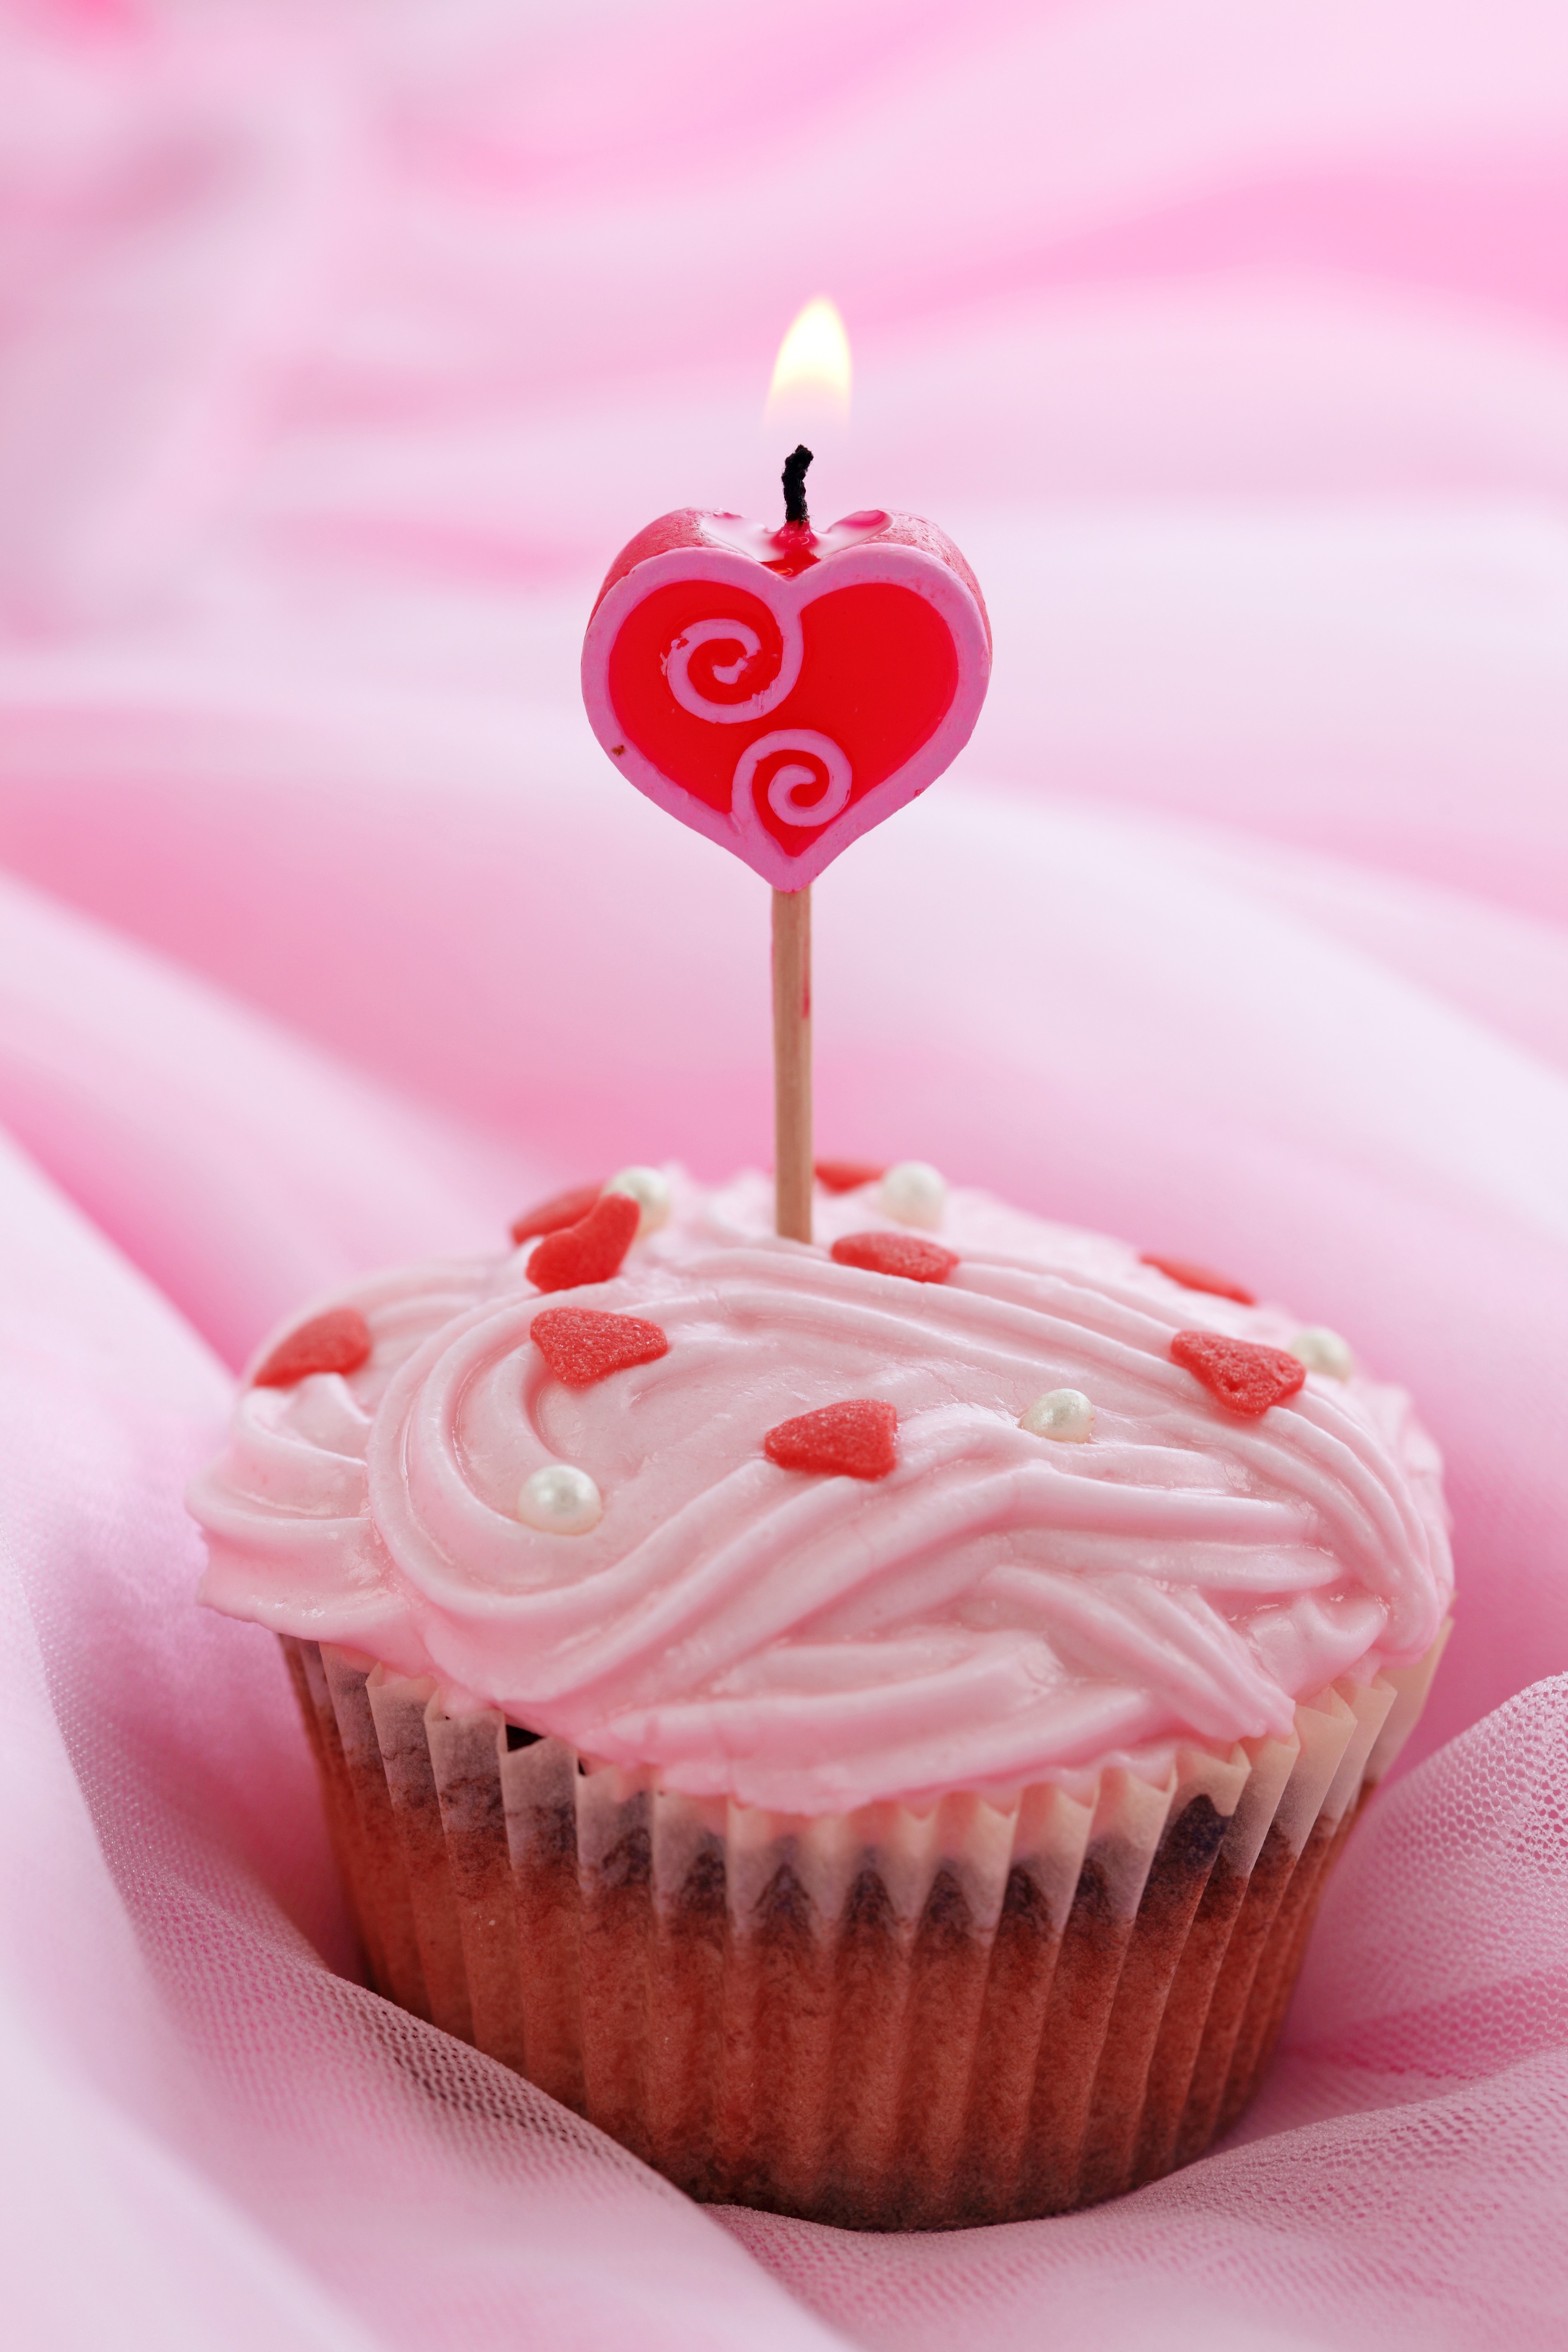 Valentine's Day, Sweets, Candles, Cupcake, Heart Gallery HD Wallpaper